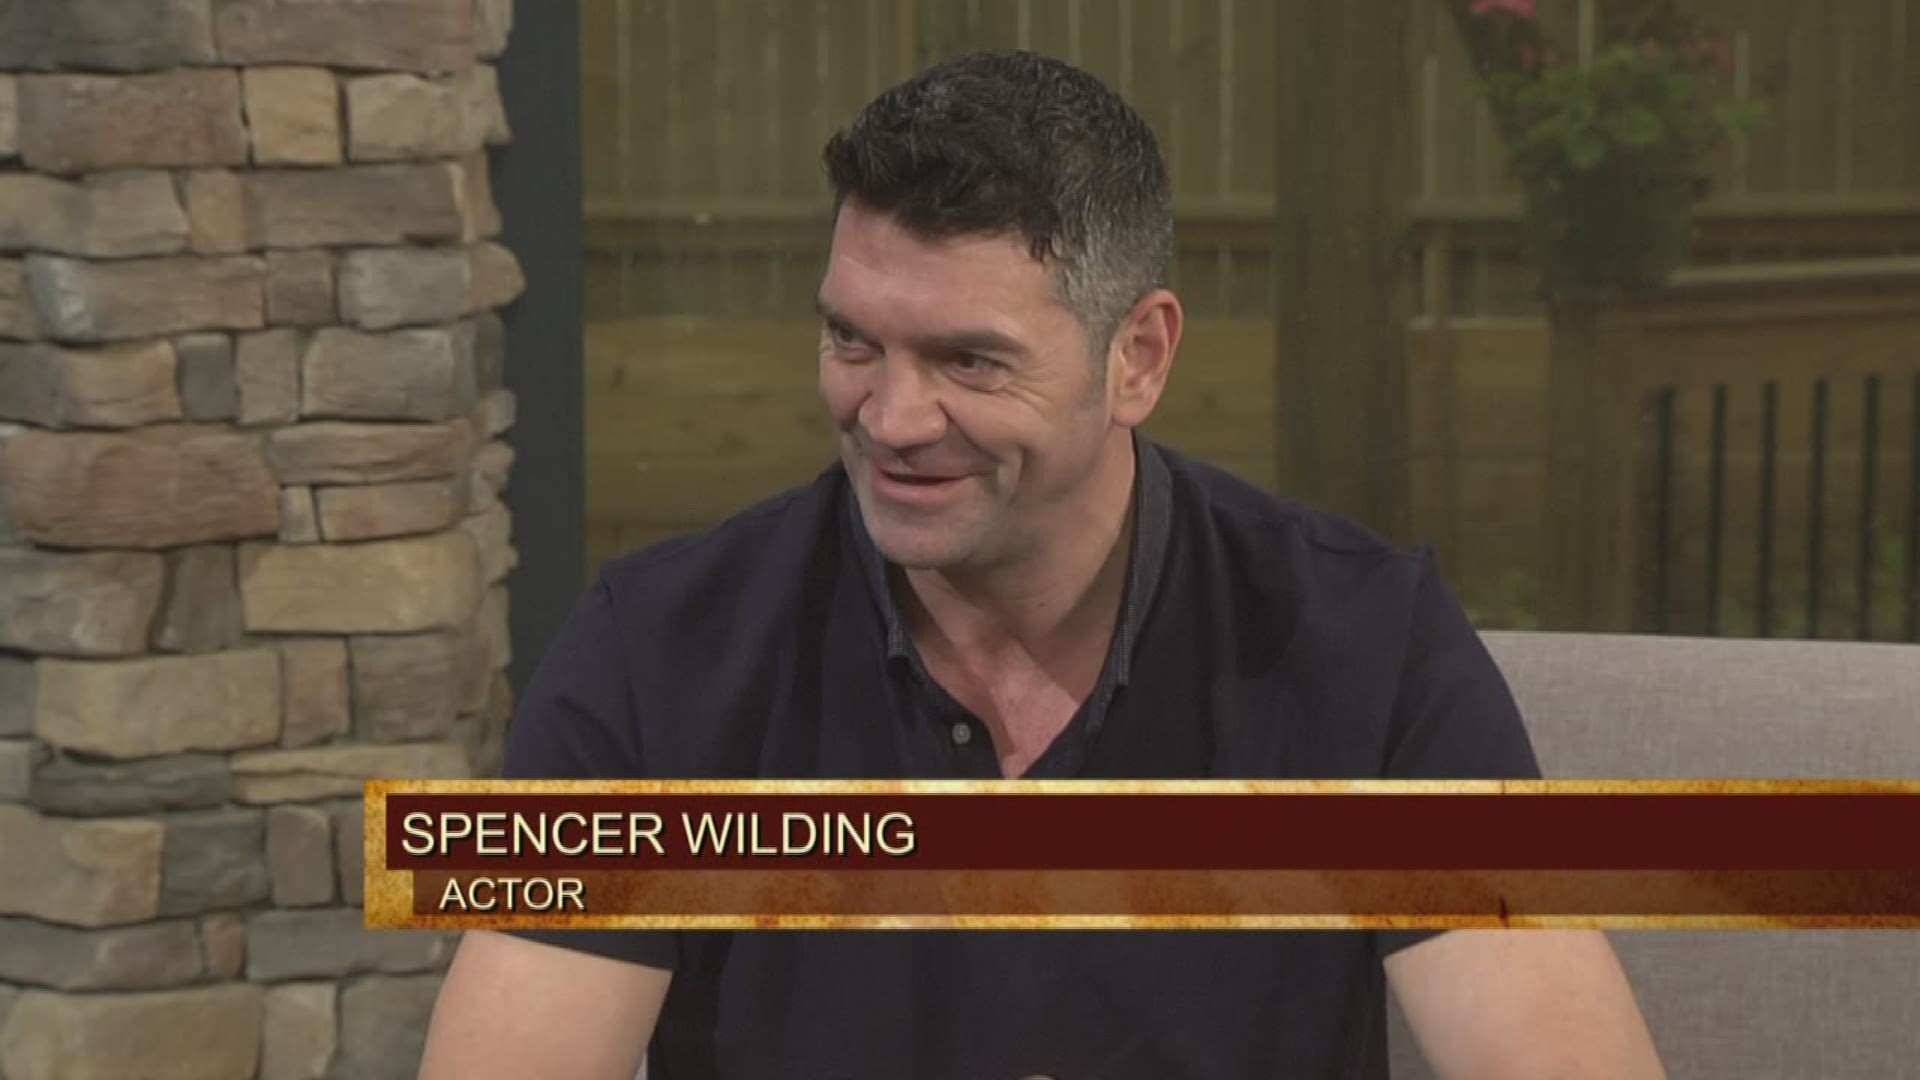 Spencer Wilding has appeared on shows like Game of Thrones and Dr. Who. He also starred in movies like Guardians of the Galaxy and as Darth Vader in Rogue One. He's in town for the Fanboy Expo Knoxville Comic Con. For more information visit fanboyexpo.com